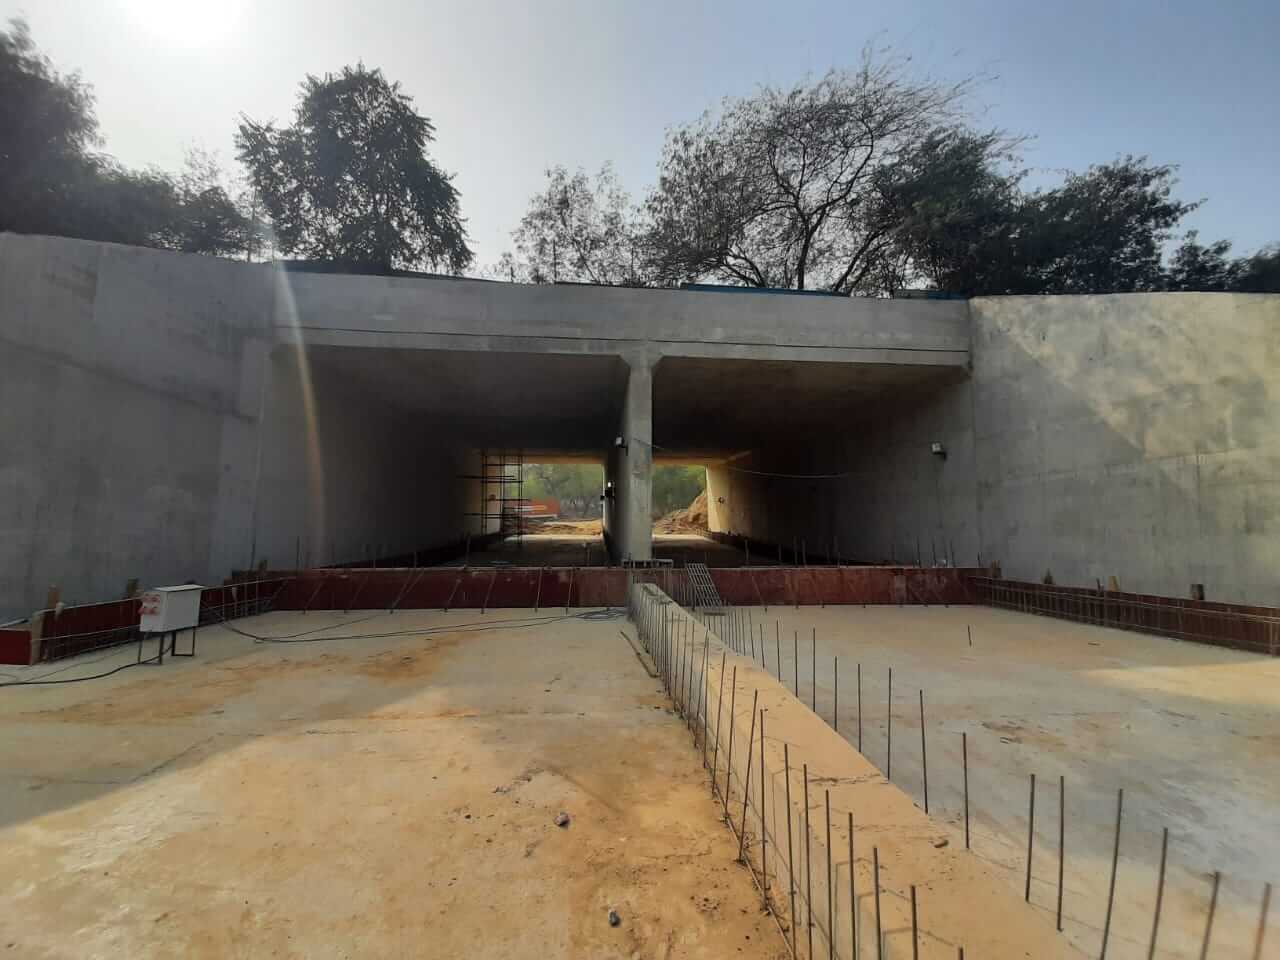 NCRTC has finished construction of Jangpura RRTS station underpass. This underpass is of four lanes and passing under Mathura Road enabling movement of every type of vehicles including heavy motor vehicles to the Jangpura RRTS station as well as train stabling cum maintenance yard being constructed at this location for all the three corridors of RRTS network.